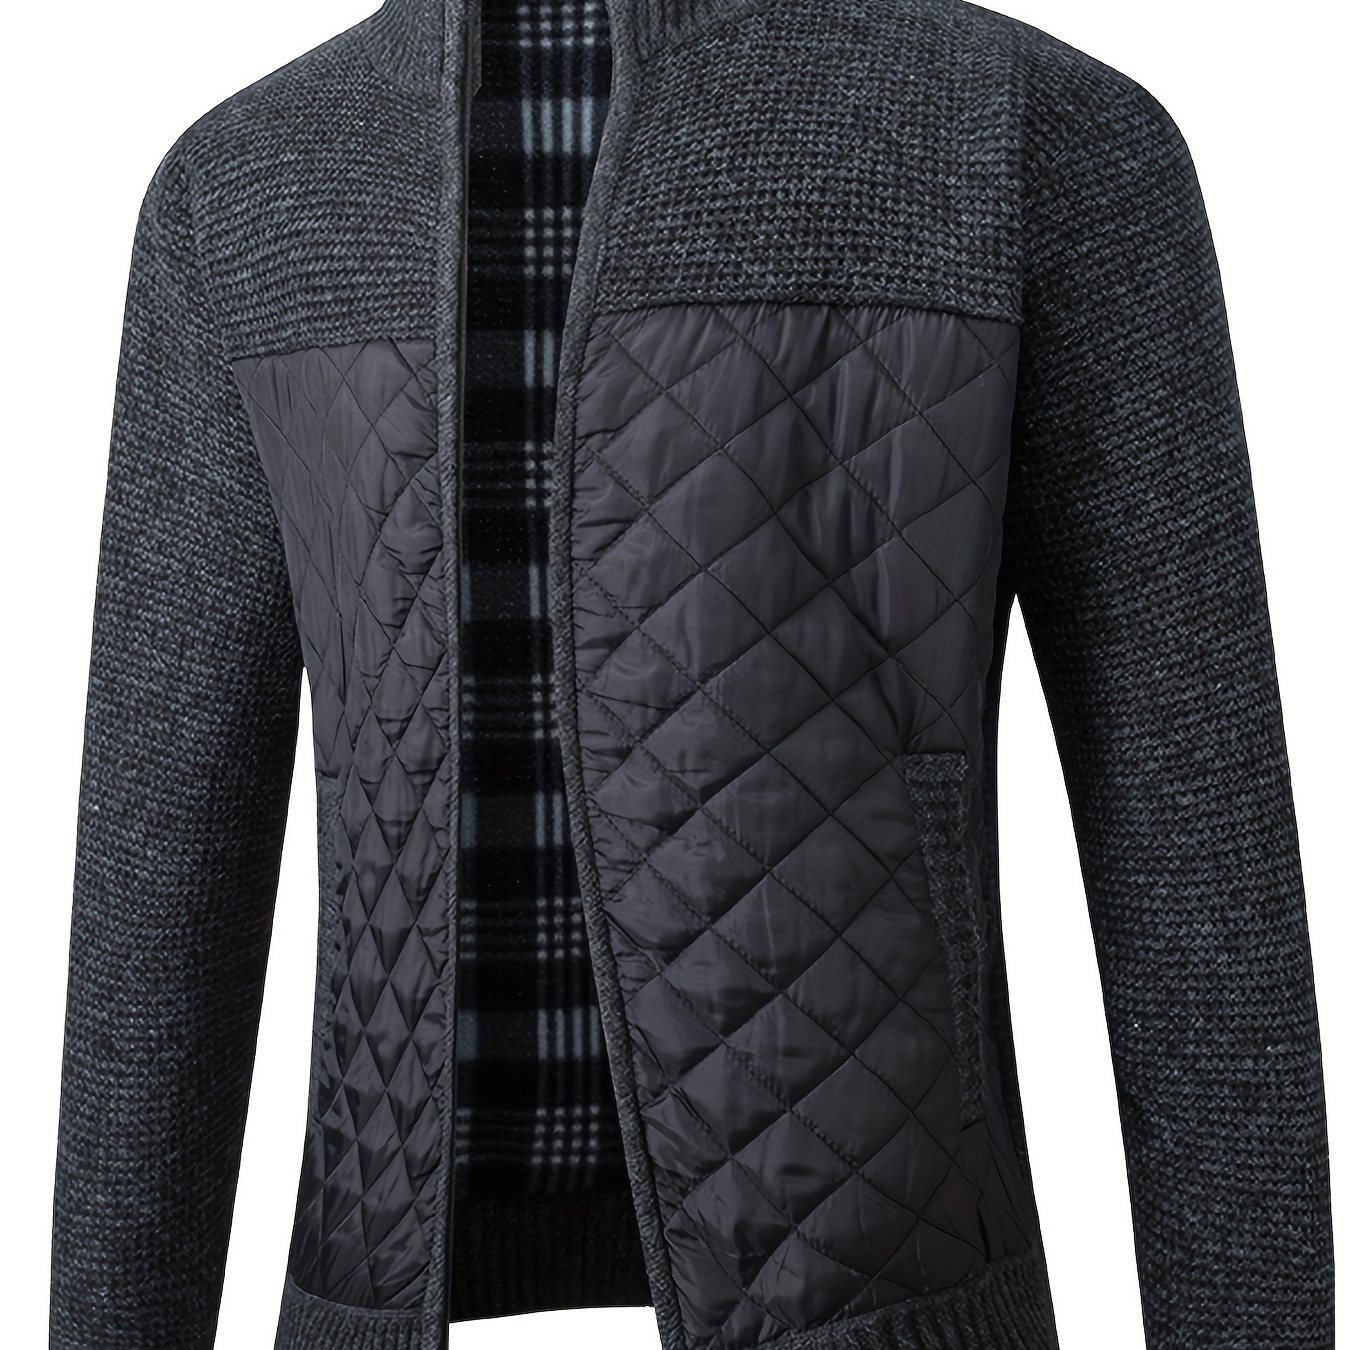 

Men's Warm Sweater Casual Quilted Jacket, Stand Collar Jacket Coat For Fall Winter